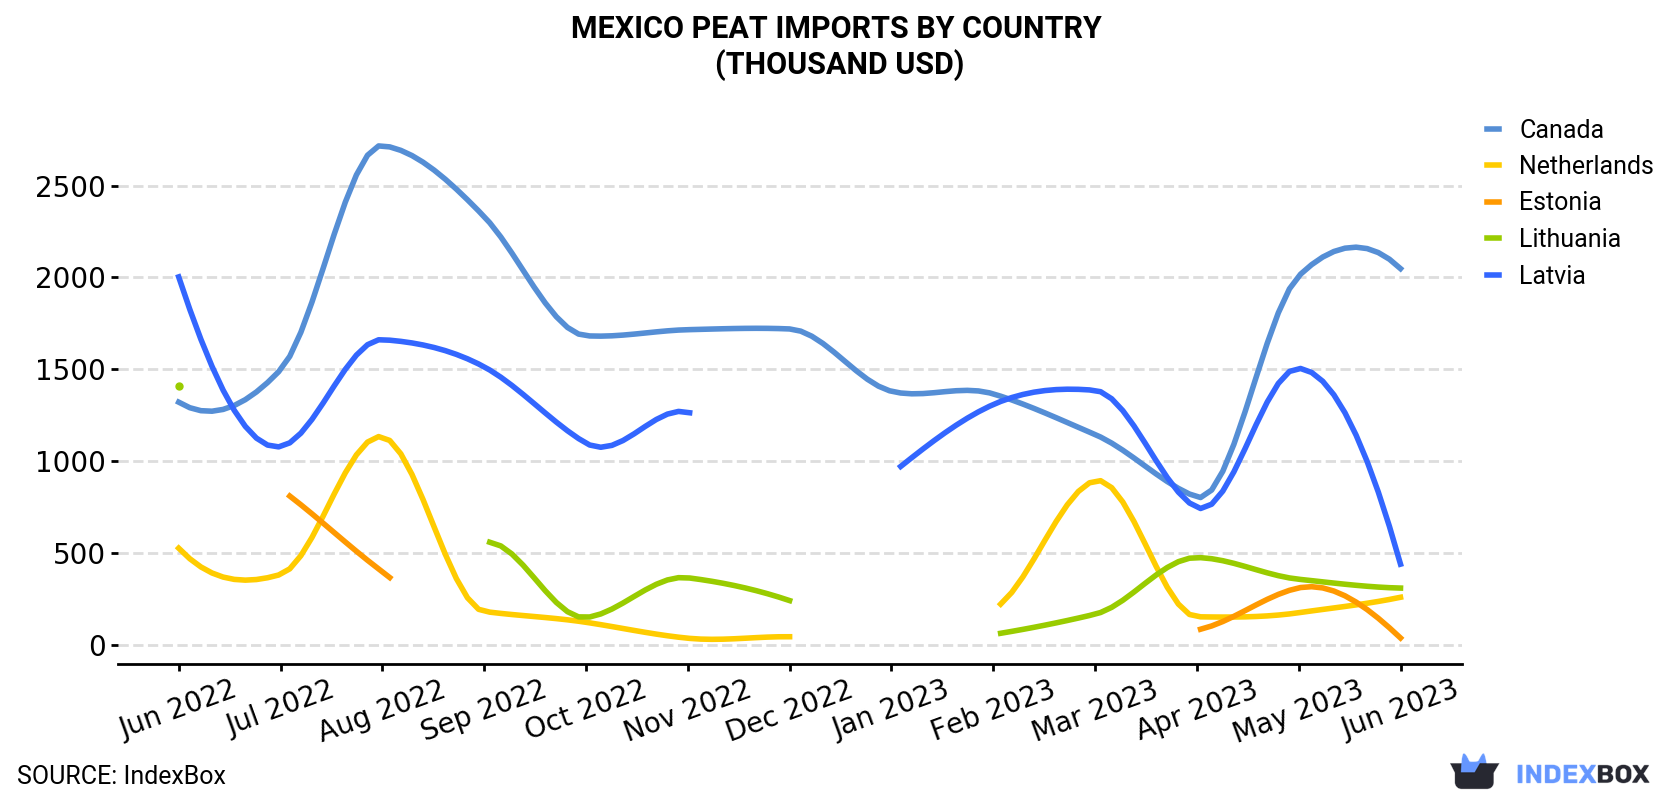 Mexico Peat Imports By Country (Thousand USD)